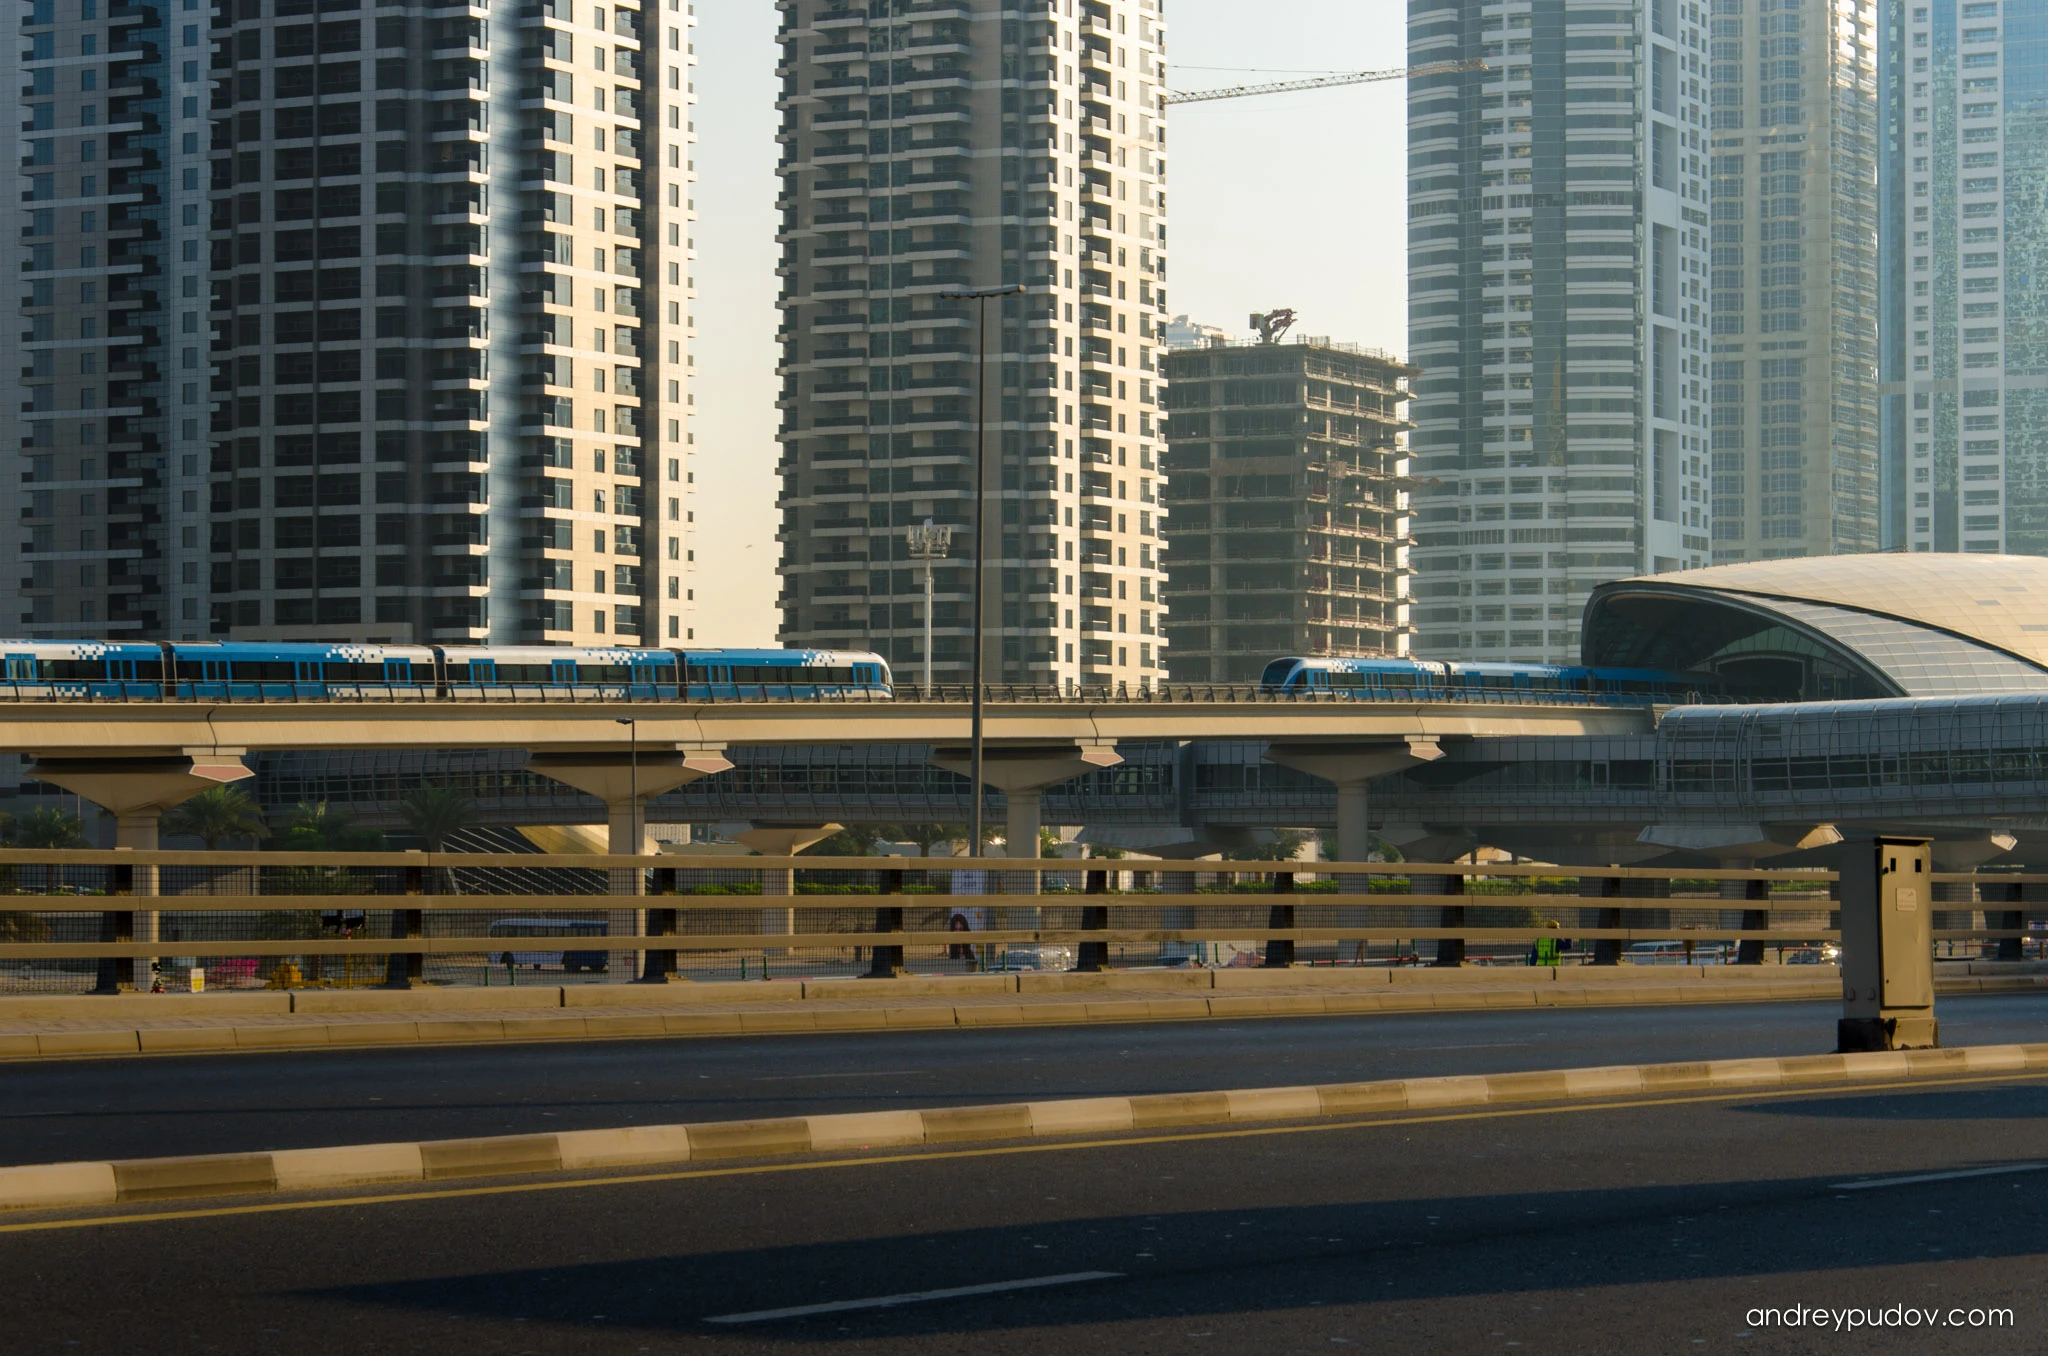 The Dubai Metro is a rapid transit rail network in the city of Dubai, United Arab Emirates.  It is currently operated by the British company Serco. Until 2016, the Dubai Metro was the world's longest driverless metro network with a route length of 75 kilometres. Planning of the Dubai Metro began under the directive of Dubai's Ruler, Sheikh Mohammed bin Rashid Al Maktoum, who expected other projects to attract 15 million visitors to Dubai by 2010.